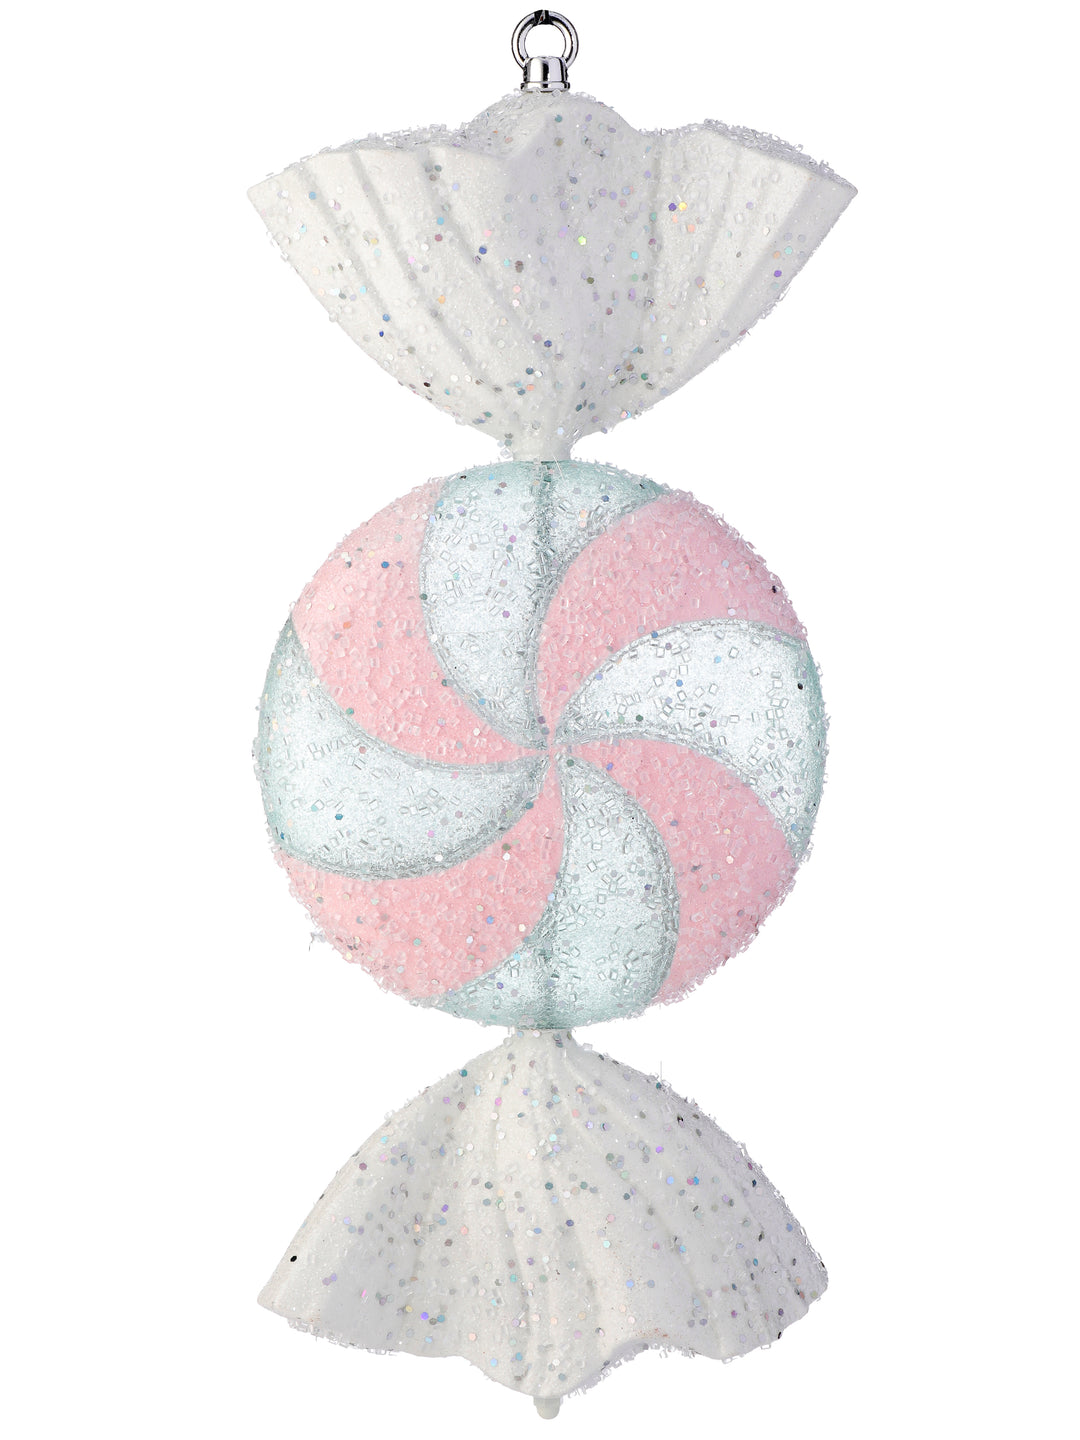 Regency 18.5" Iced Peppermint Candy Ornament in Pink/Green/White